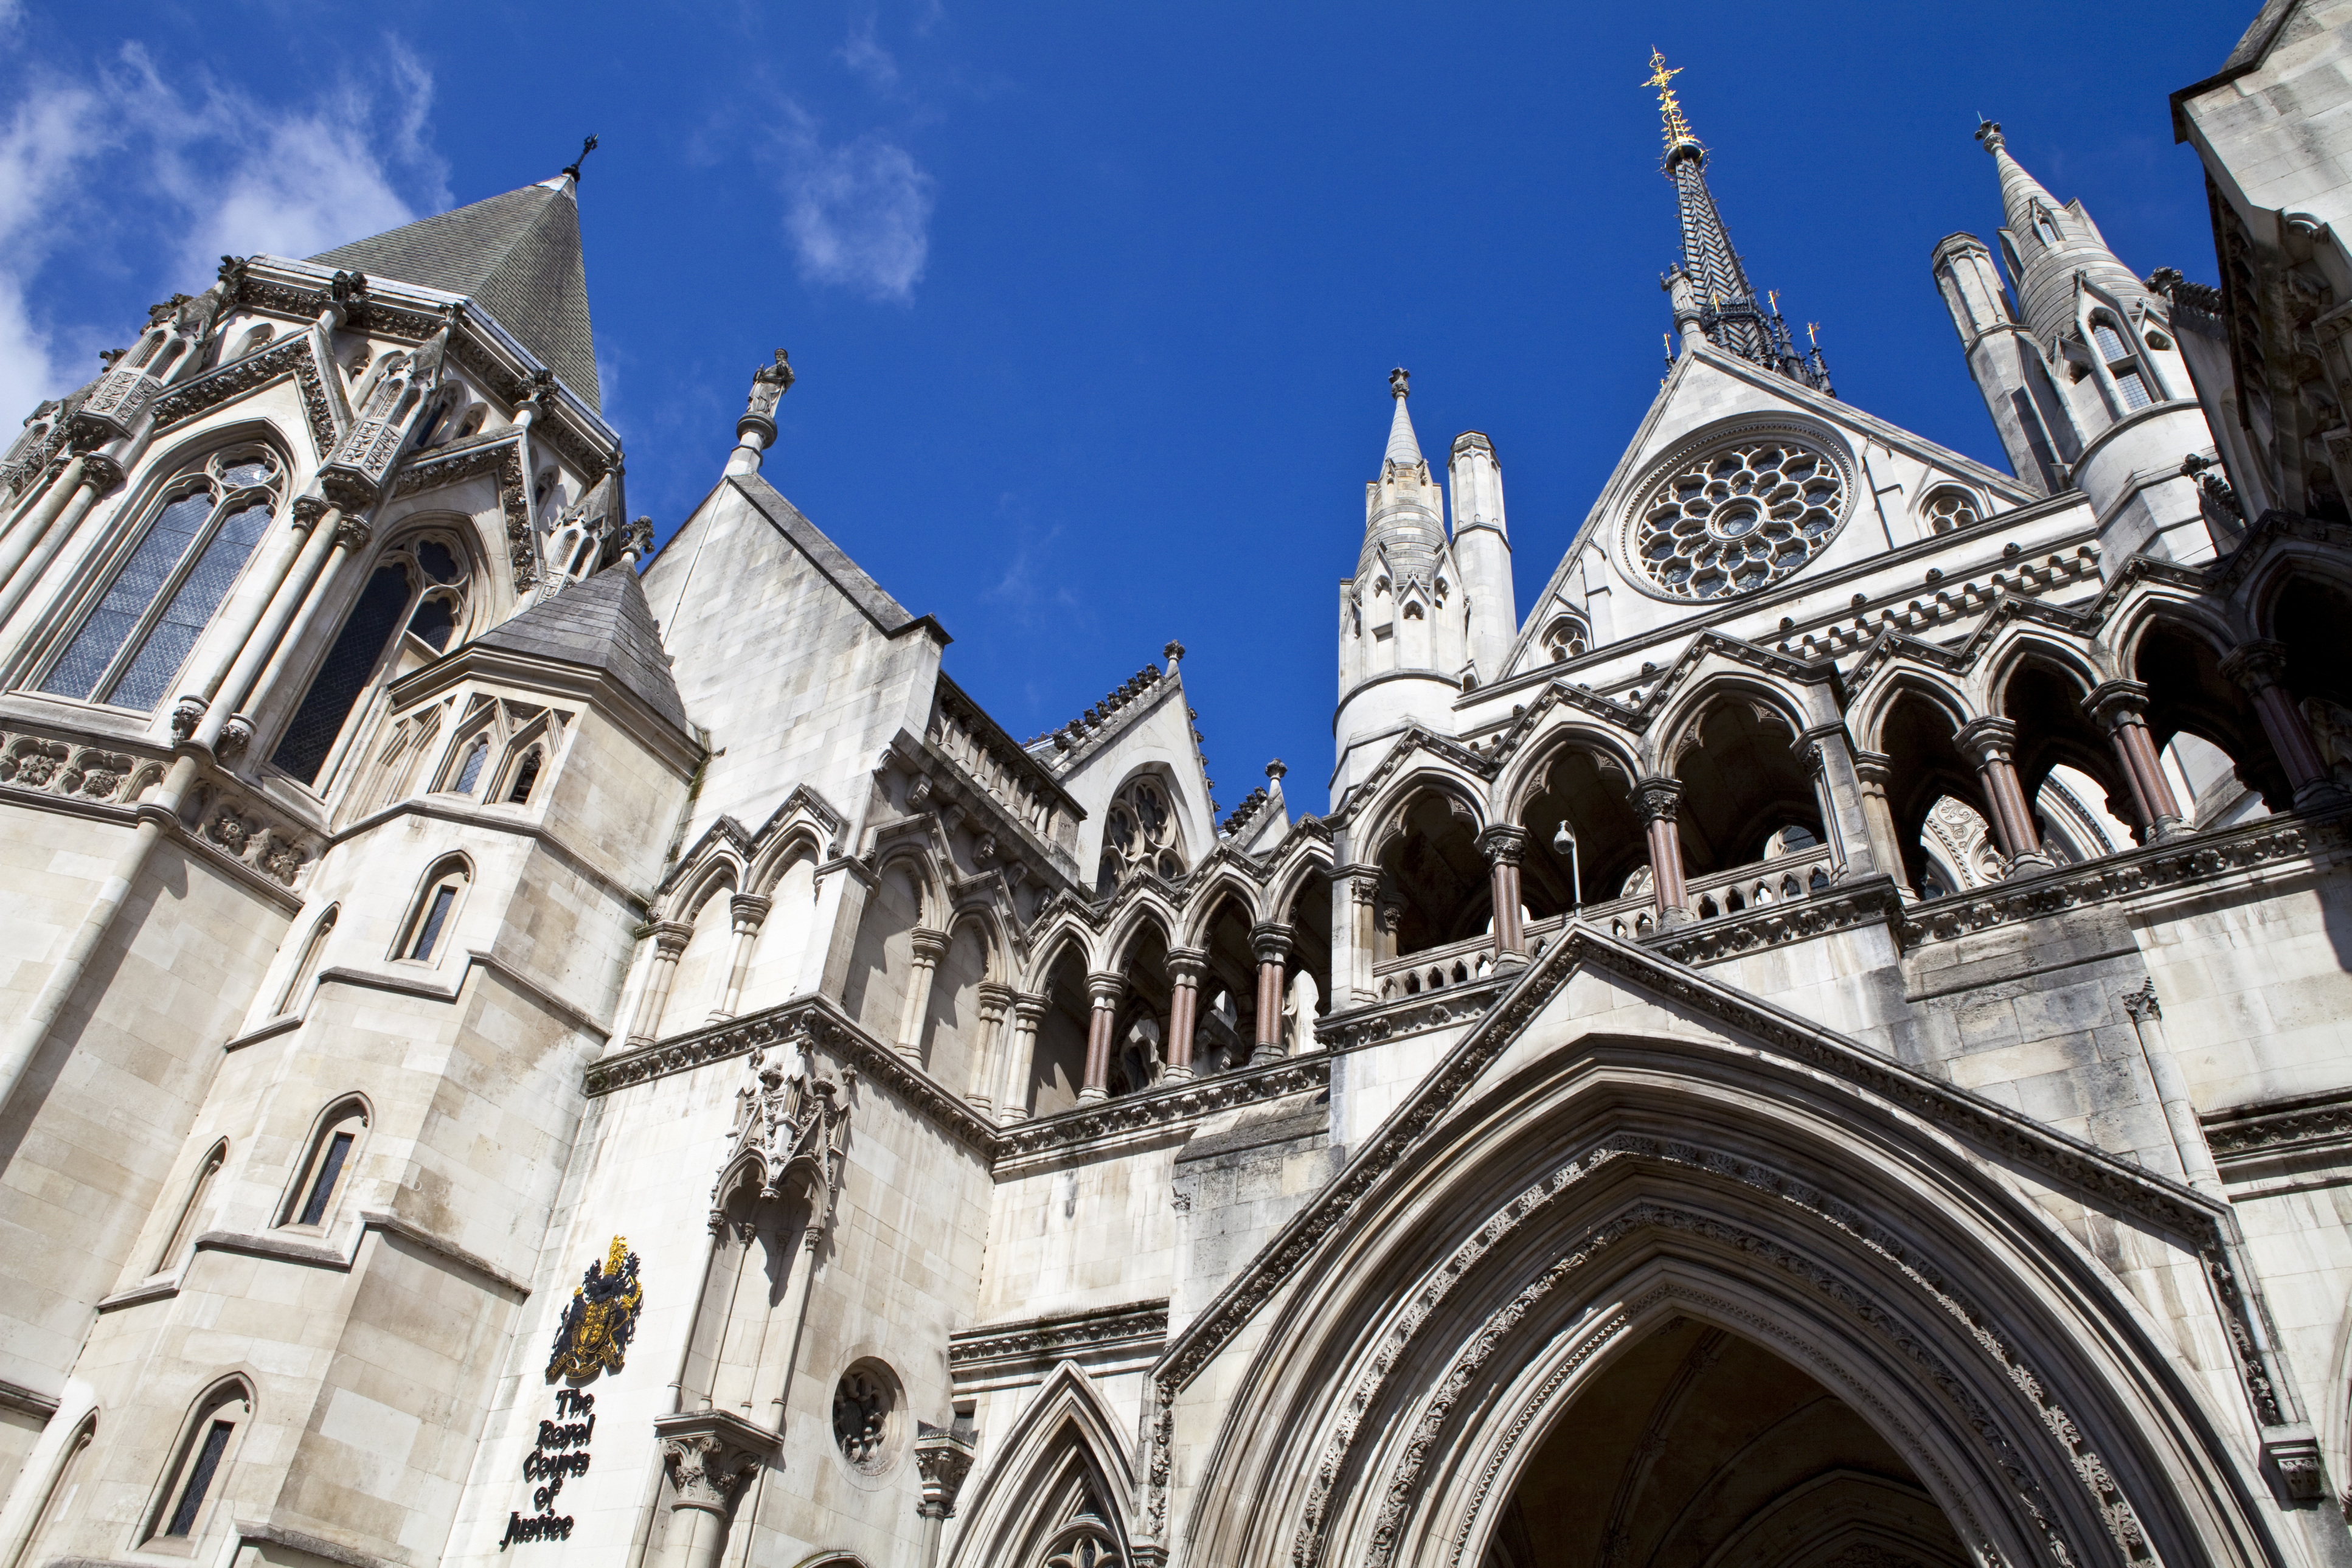 Legal: UK Supreme Court ruling favours landlord in service charge dispute - https://roomslocal.co.uk/blog/legal-uk-supreme-court-ruling-favours-landlord-in-service-charge-dispute #supreme #court #ruling #favours #landlord